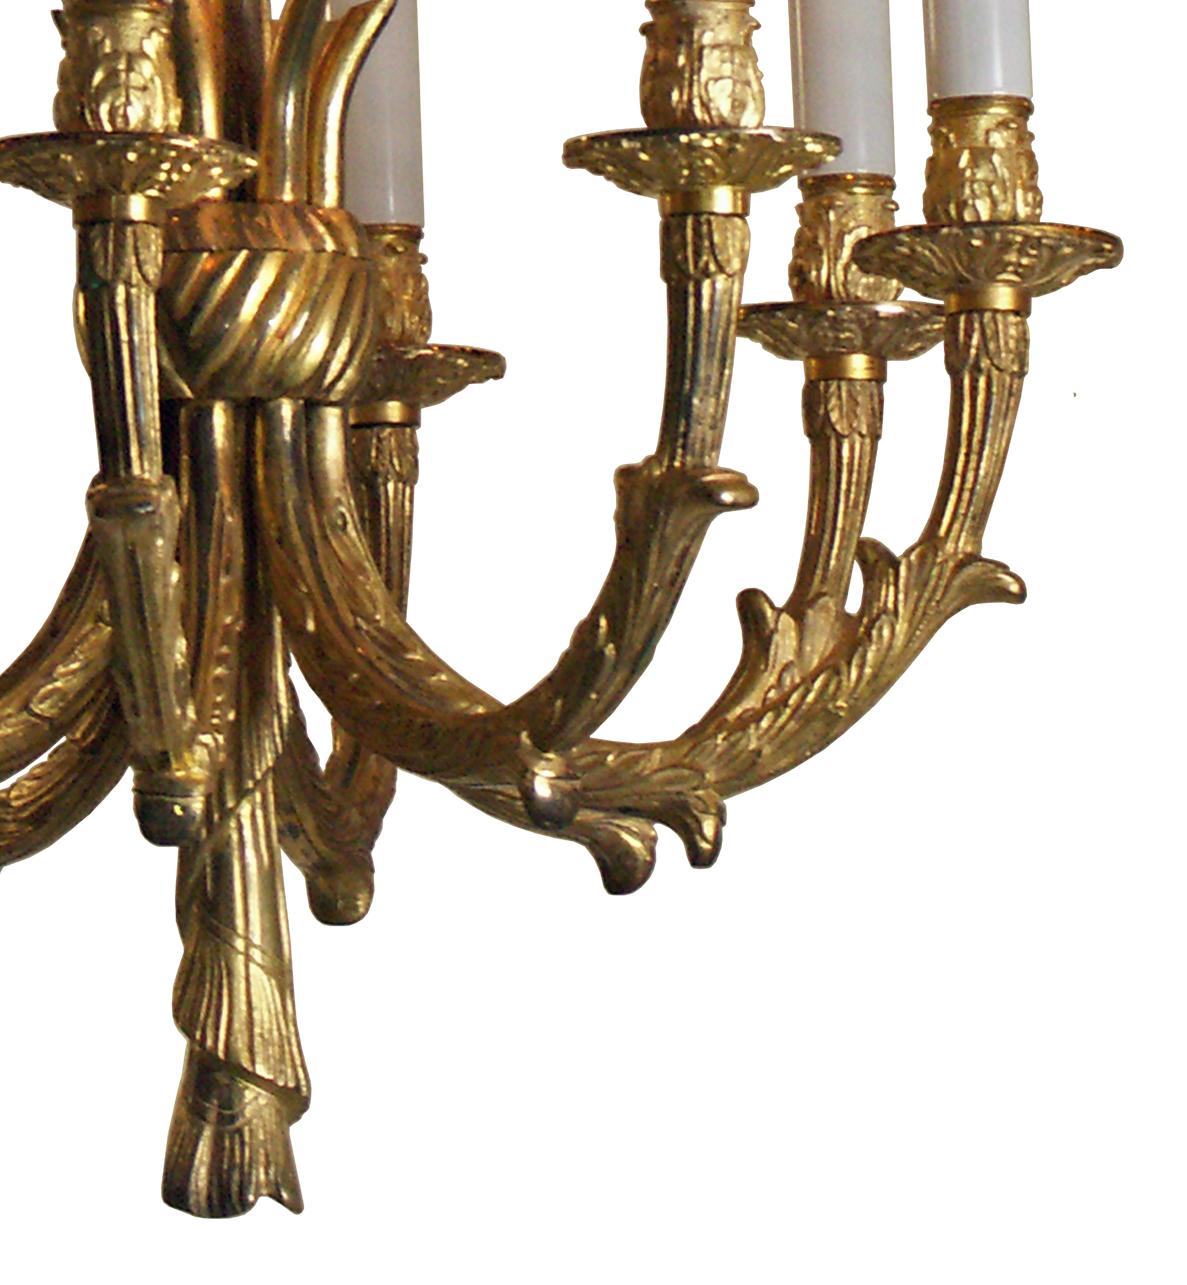 Hand-Crafted Original Neoclassical Austrian Mastercraft Brass Parlor Chandelier For Sale